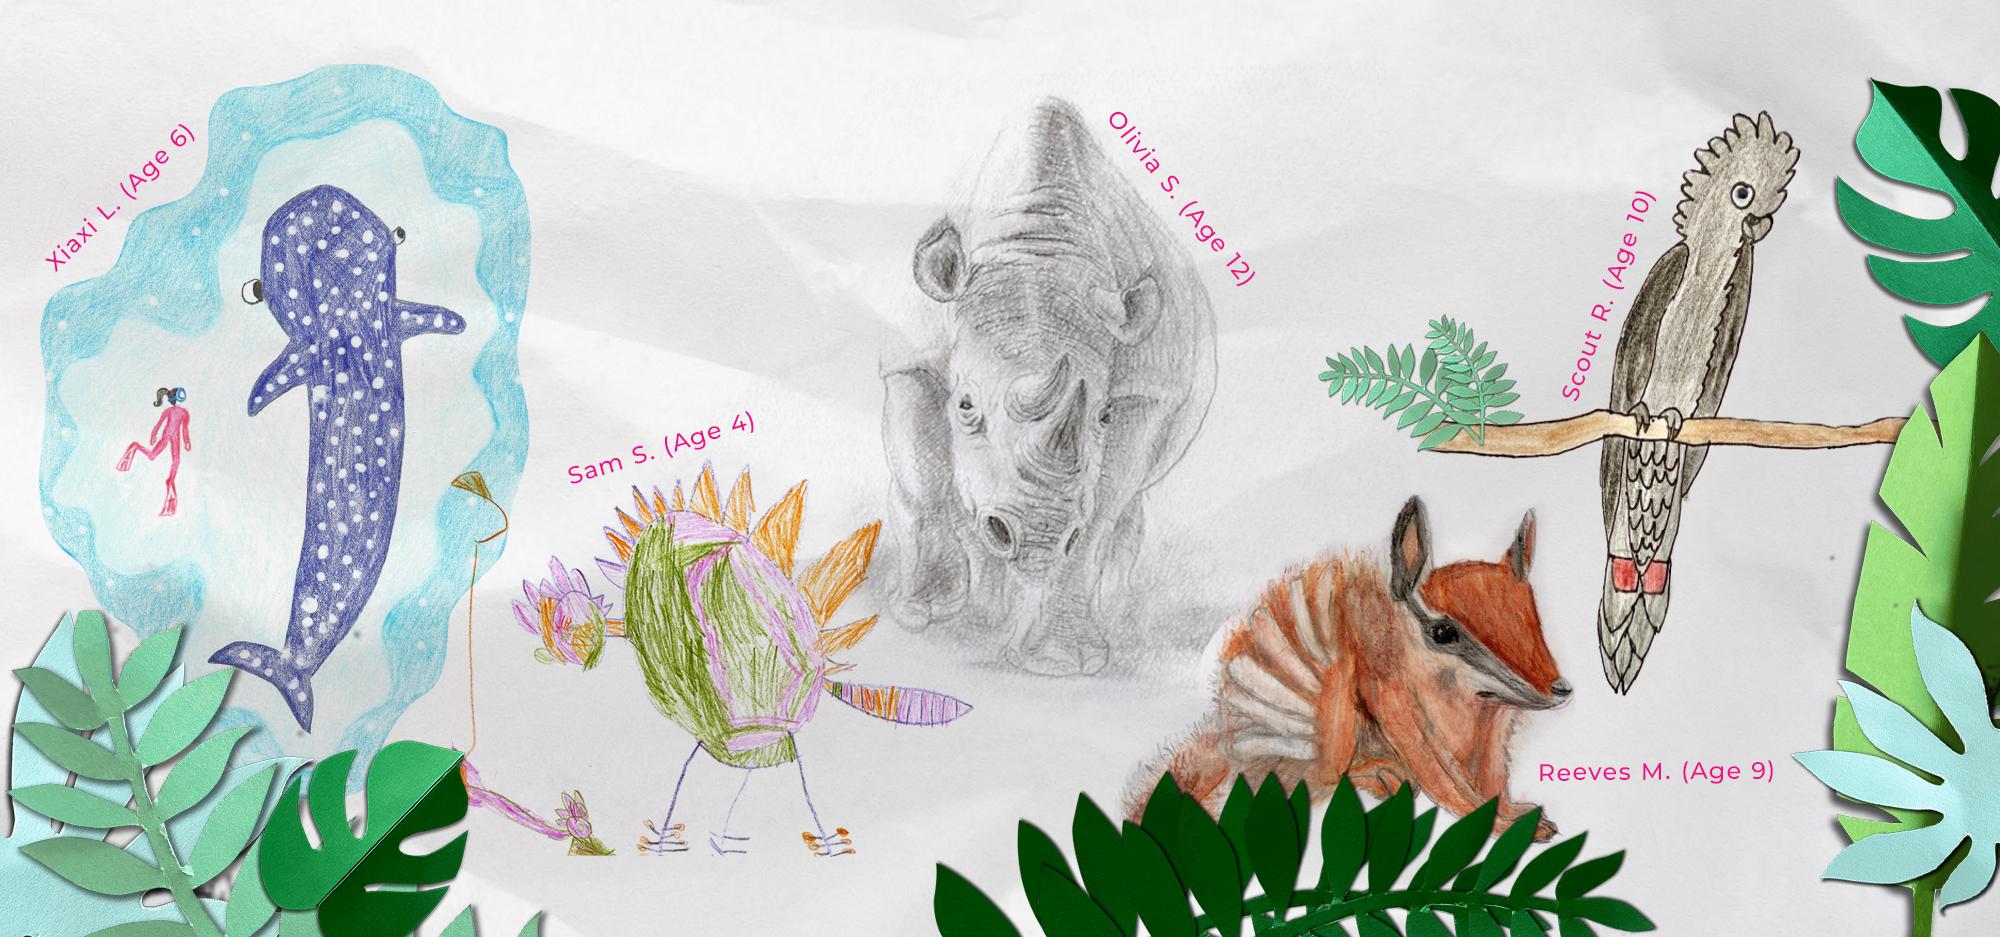 A series of children's drawings of a whale shark, dinosaur, rhino, numbat and cockatoo in various styles and colours, surrounded by green leaves